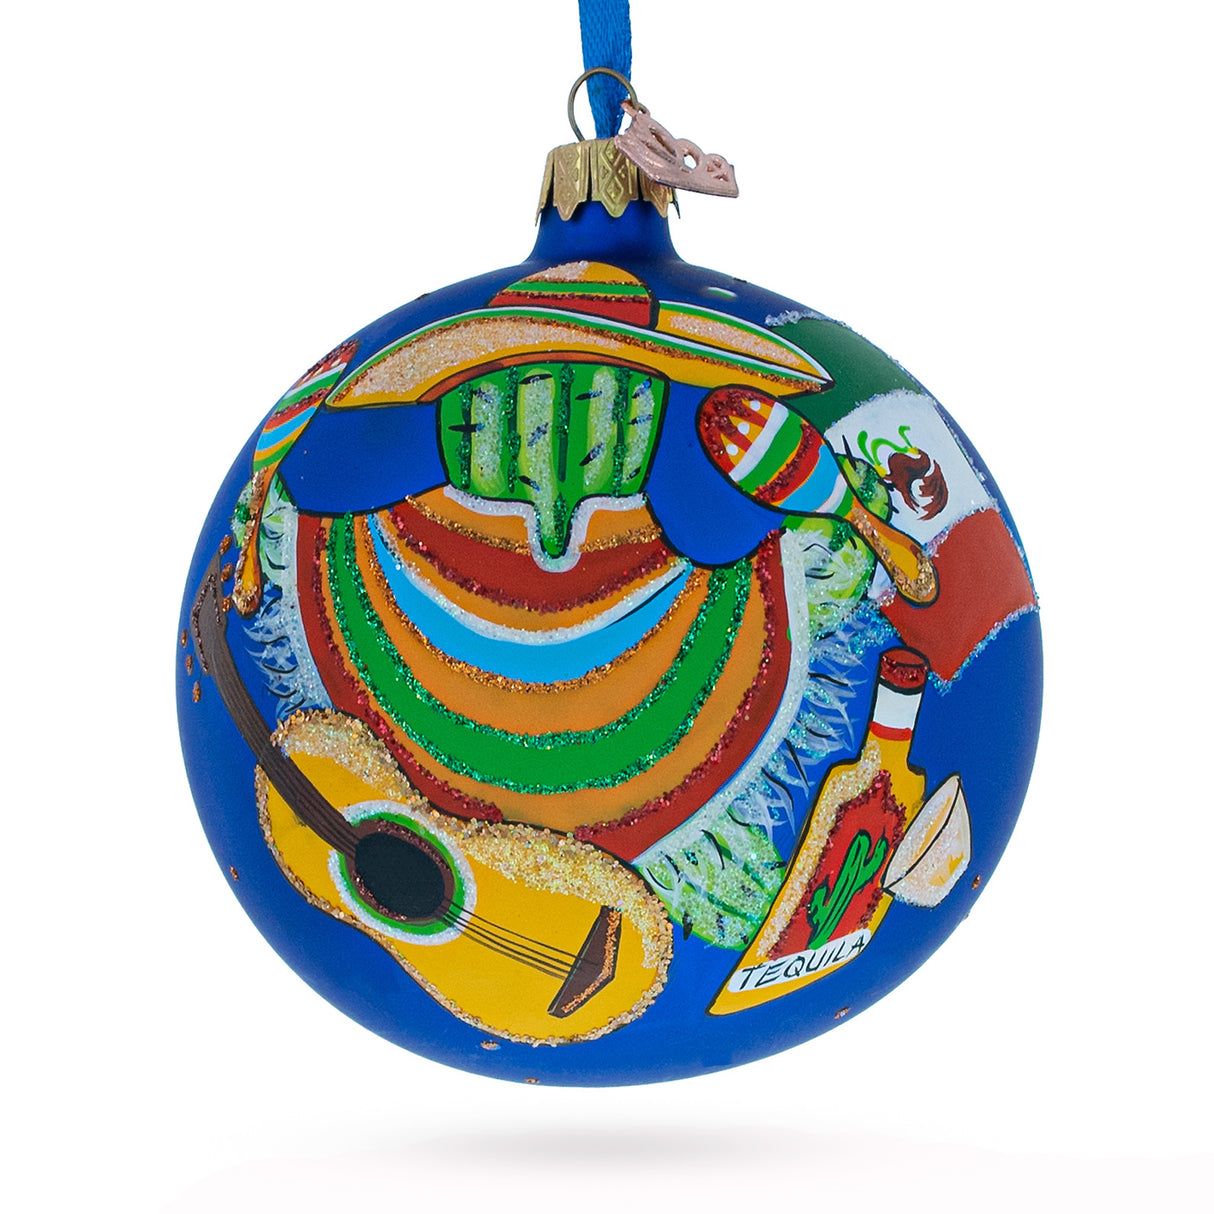 Glass Mexico Glass Ball Christmas Ornament 4 Inches in Blue color Round